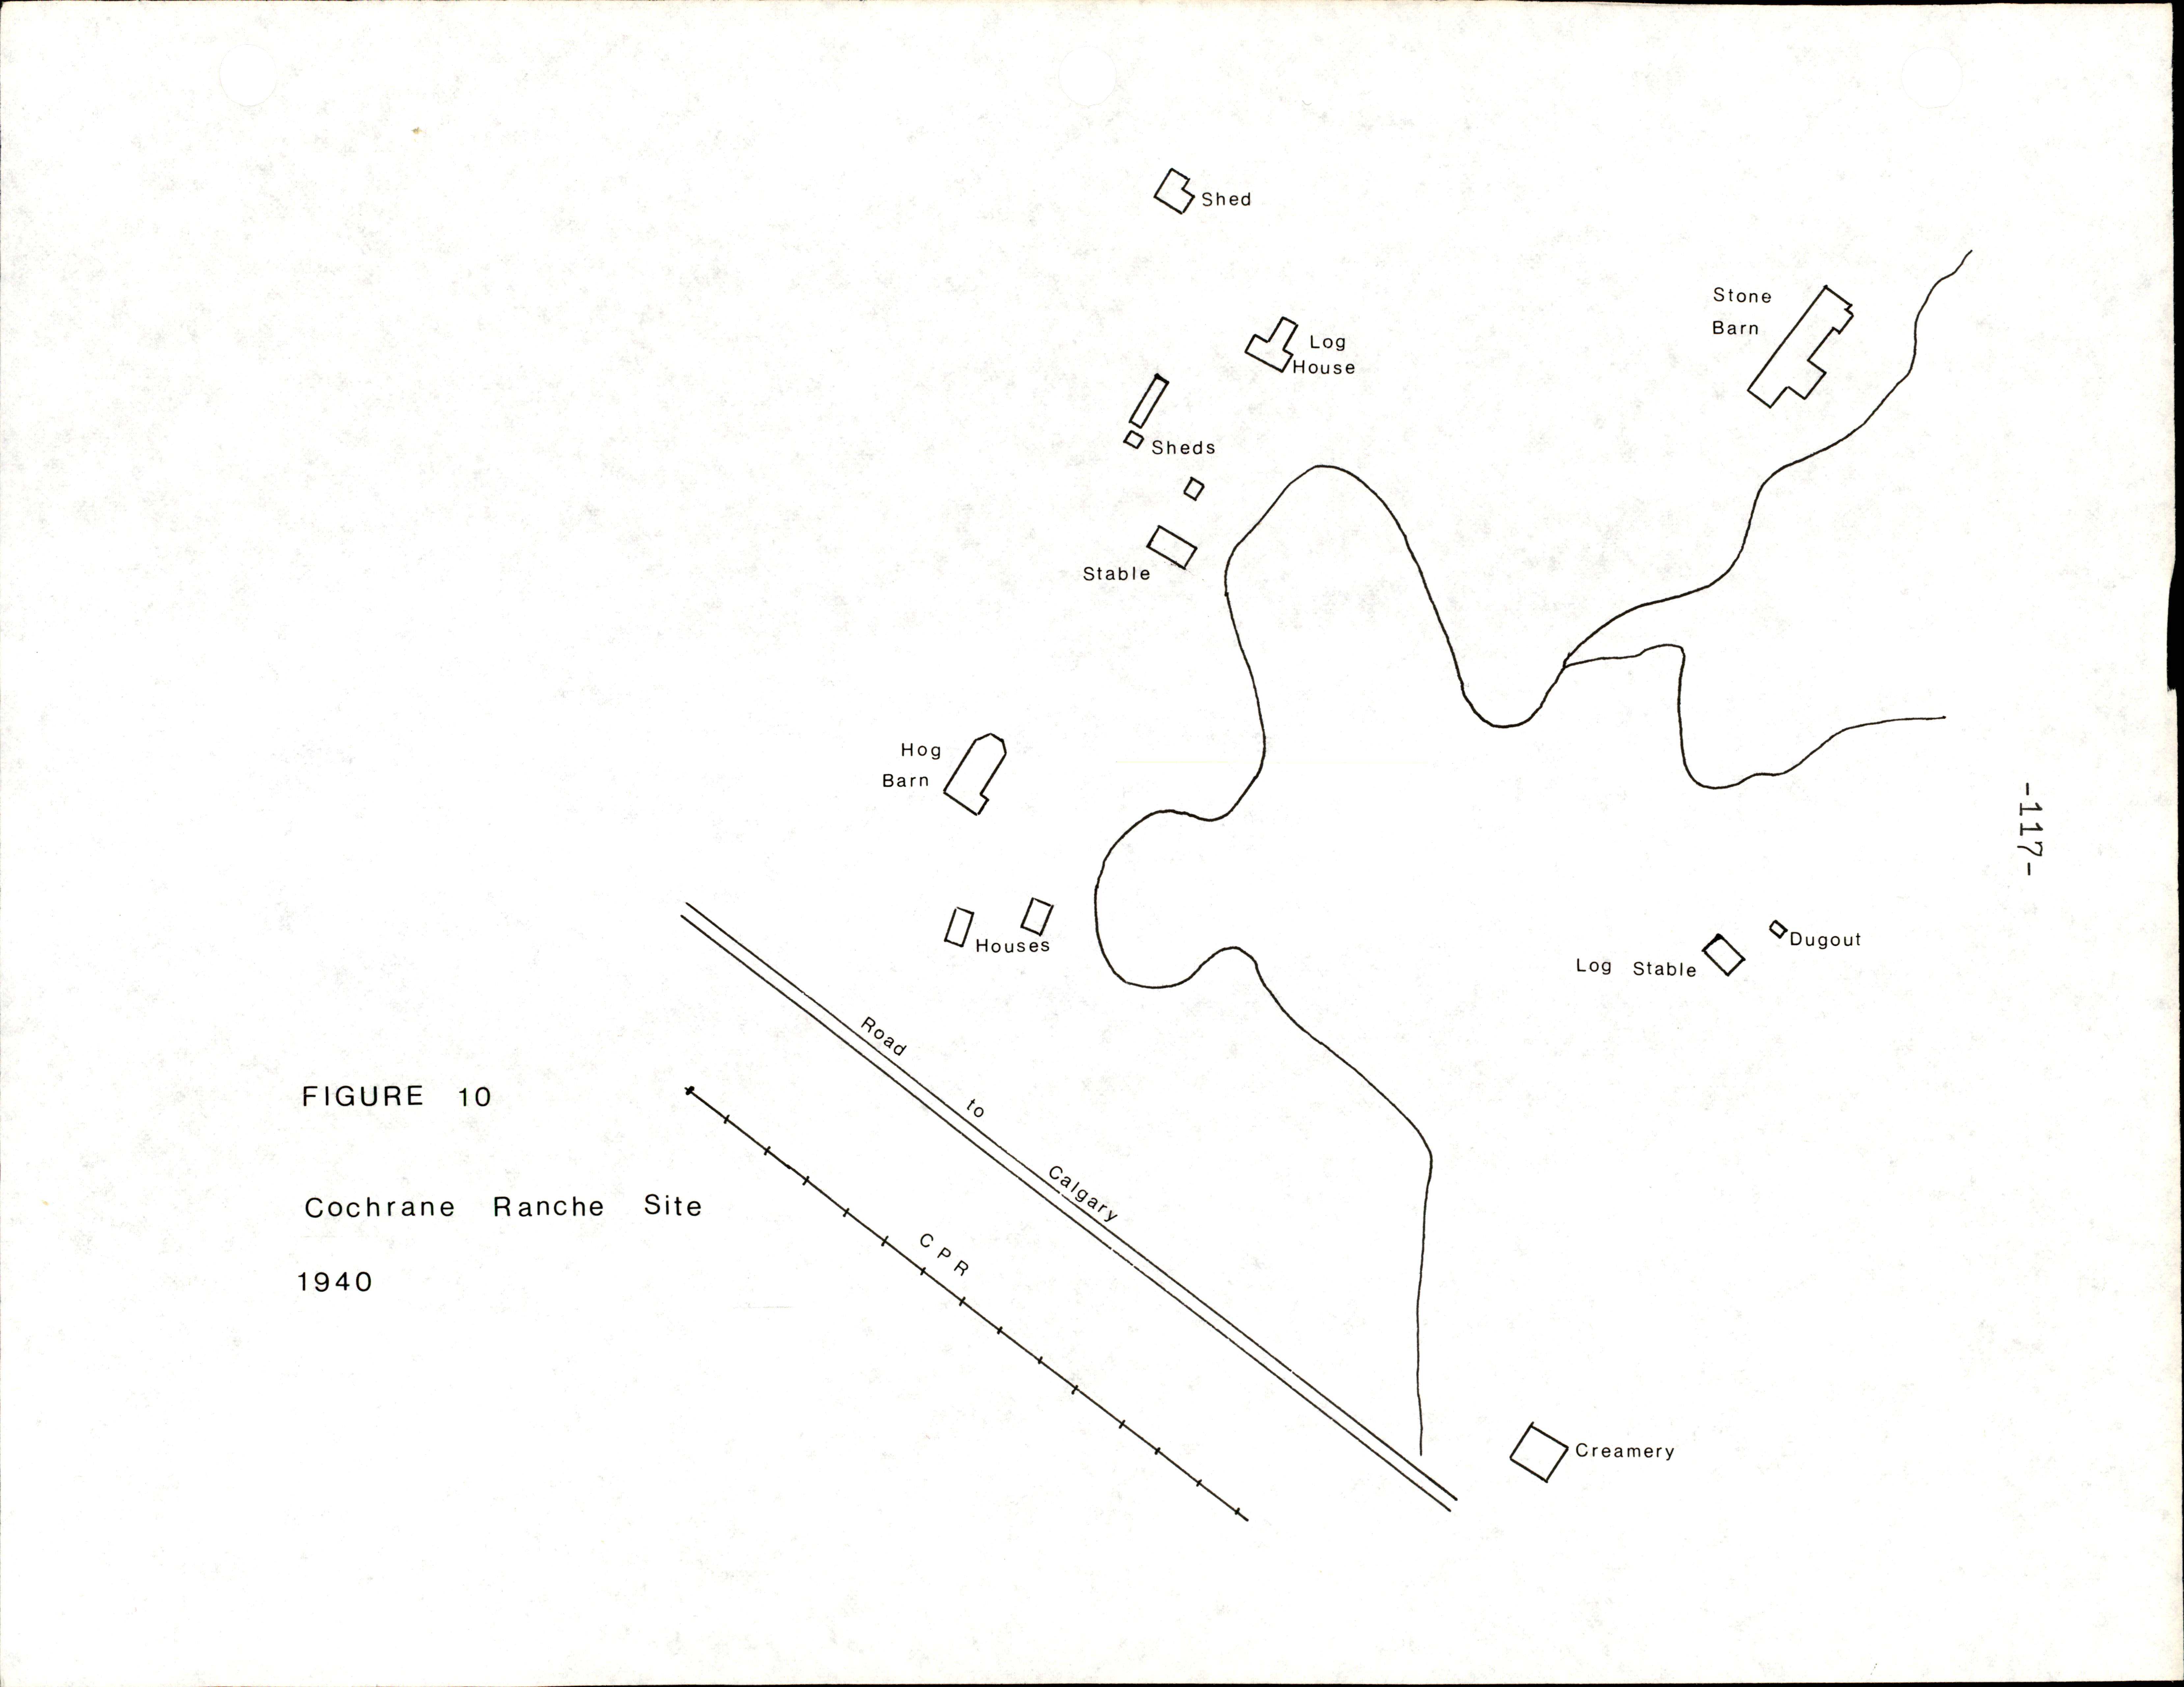 Map of the Cochrane Ranche site, 1940, created by Ken Mather 1978.